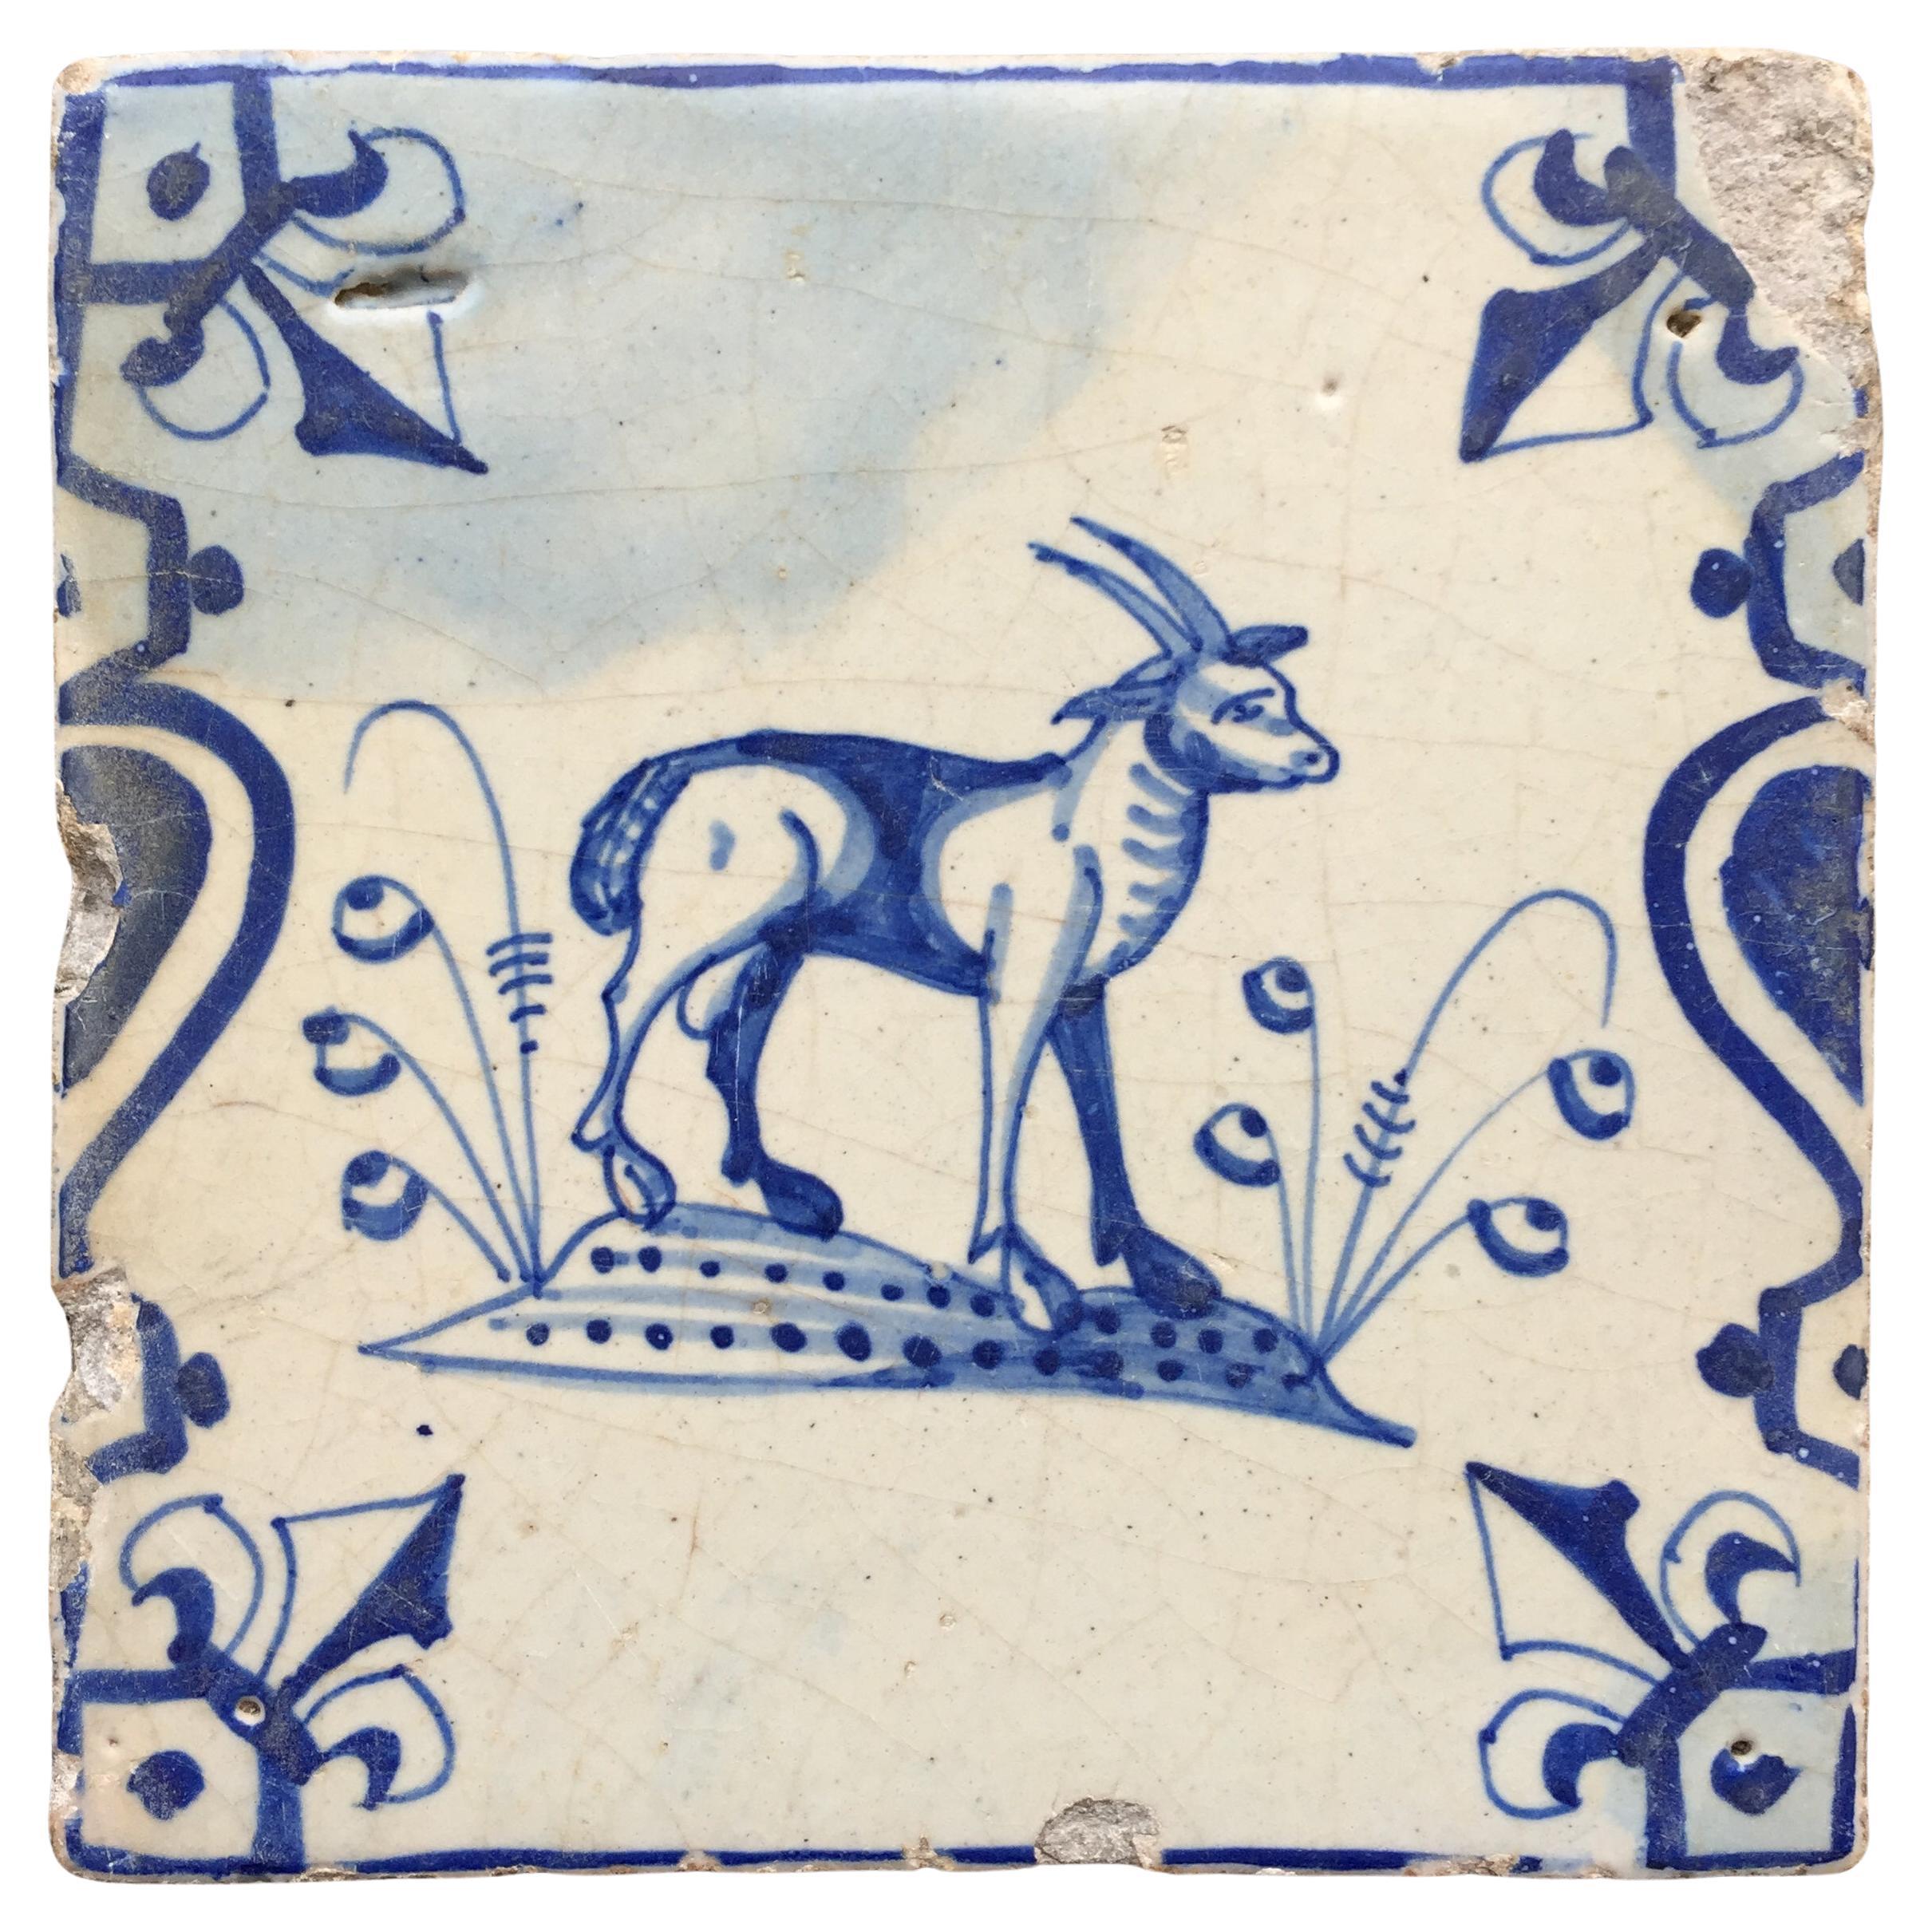 17th Century Dutch Delft Tile with decoration of a Goat